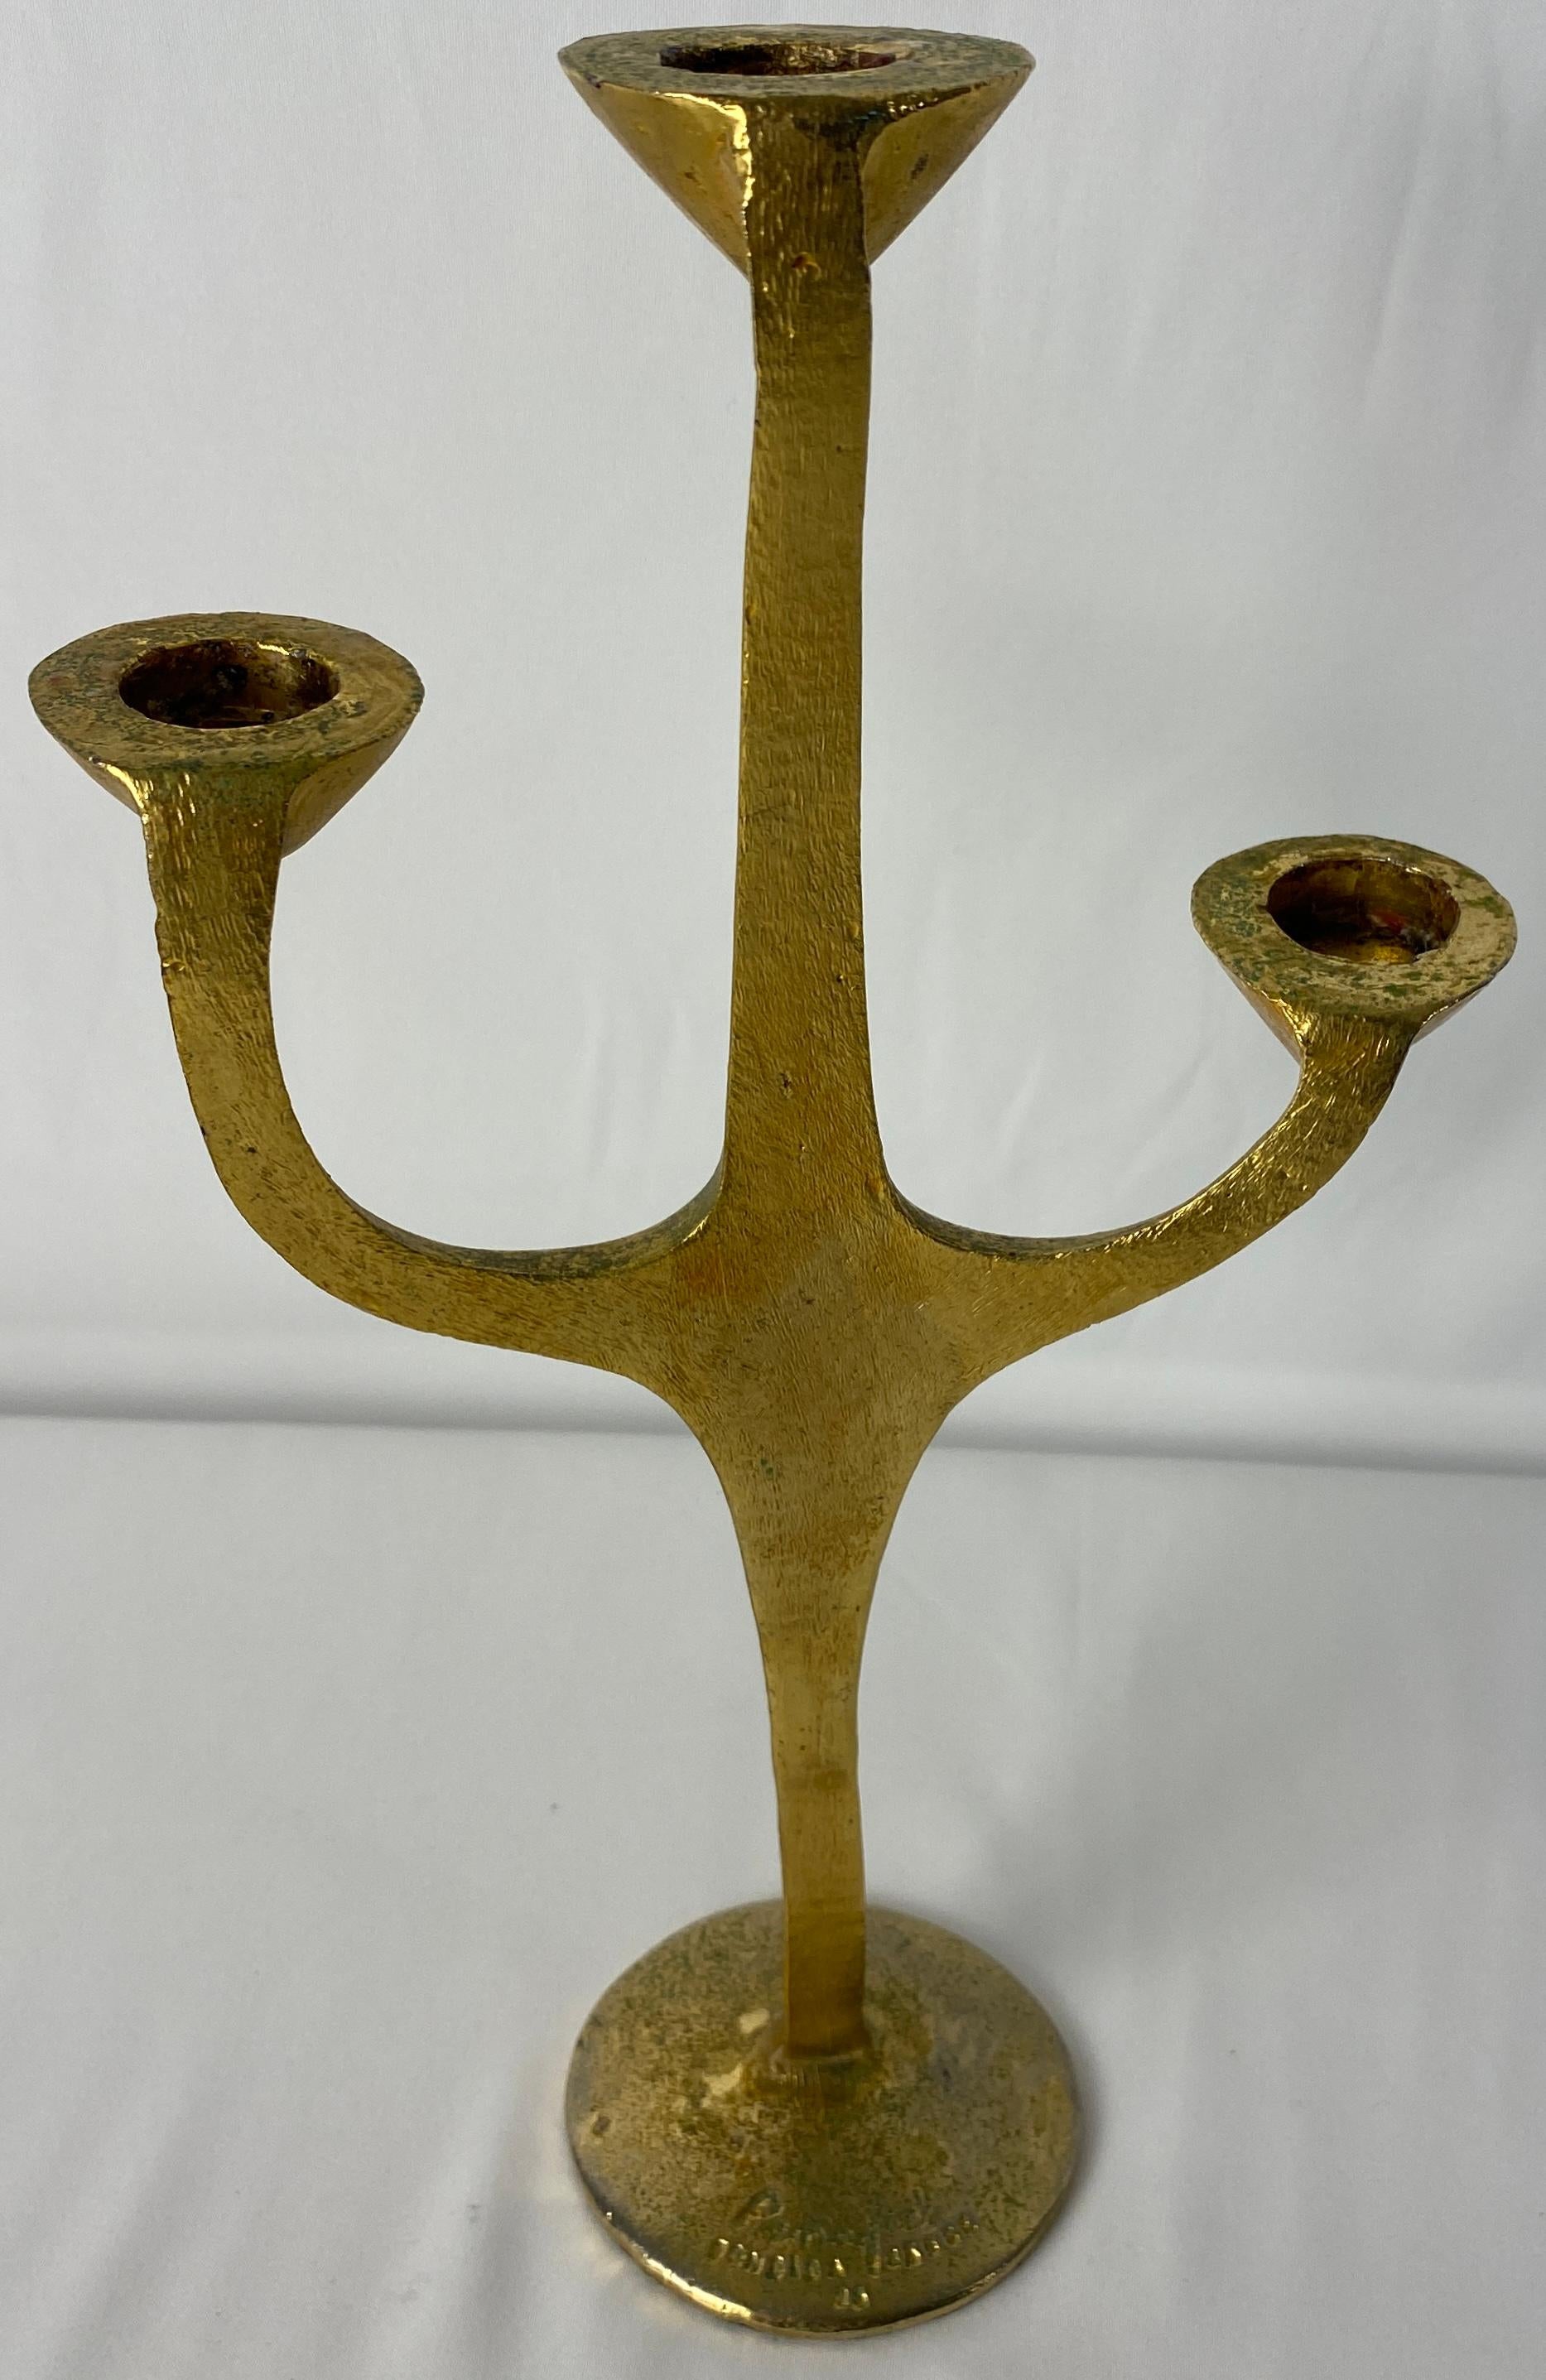 A fine sculptural three-arm bronze candle holder by Carlos Penafiel. 
Signed.

Measures: 11 5/8